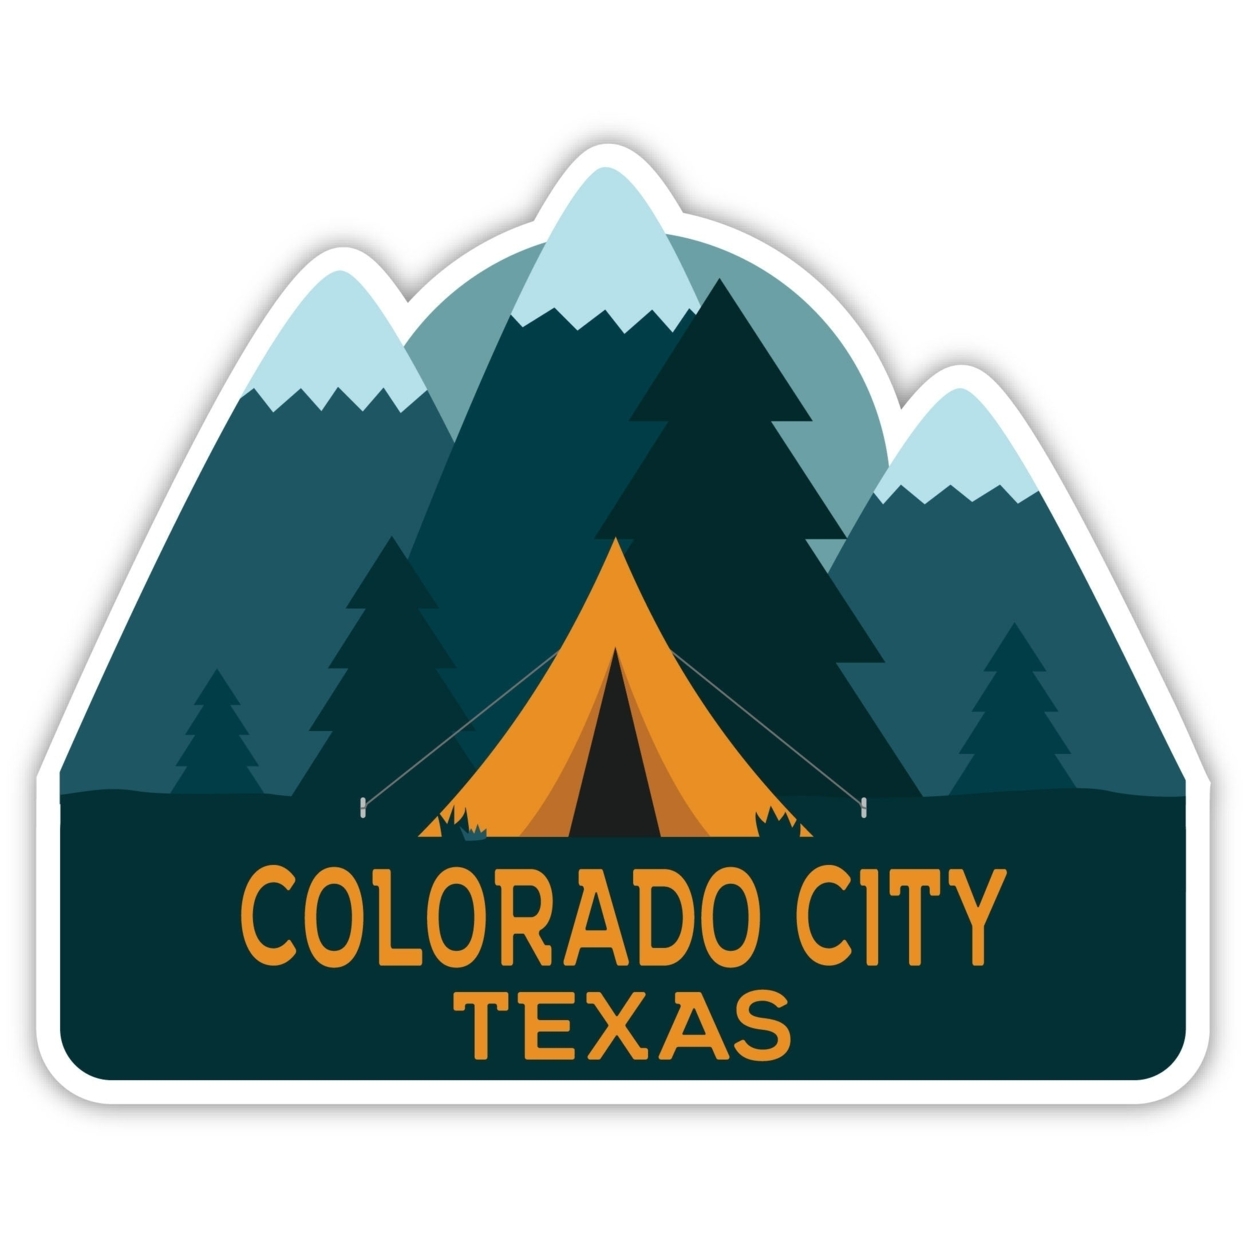 Colorado City Texas Souvenir Decorative Stickers (Choose Theme And Size) - 4-Pack, 12-Inch, Tent